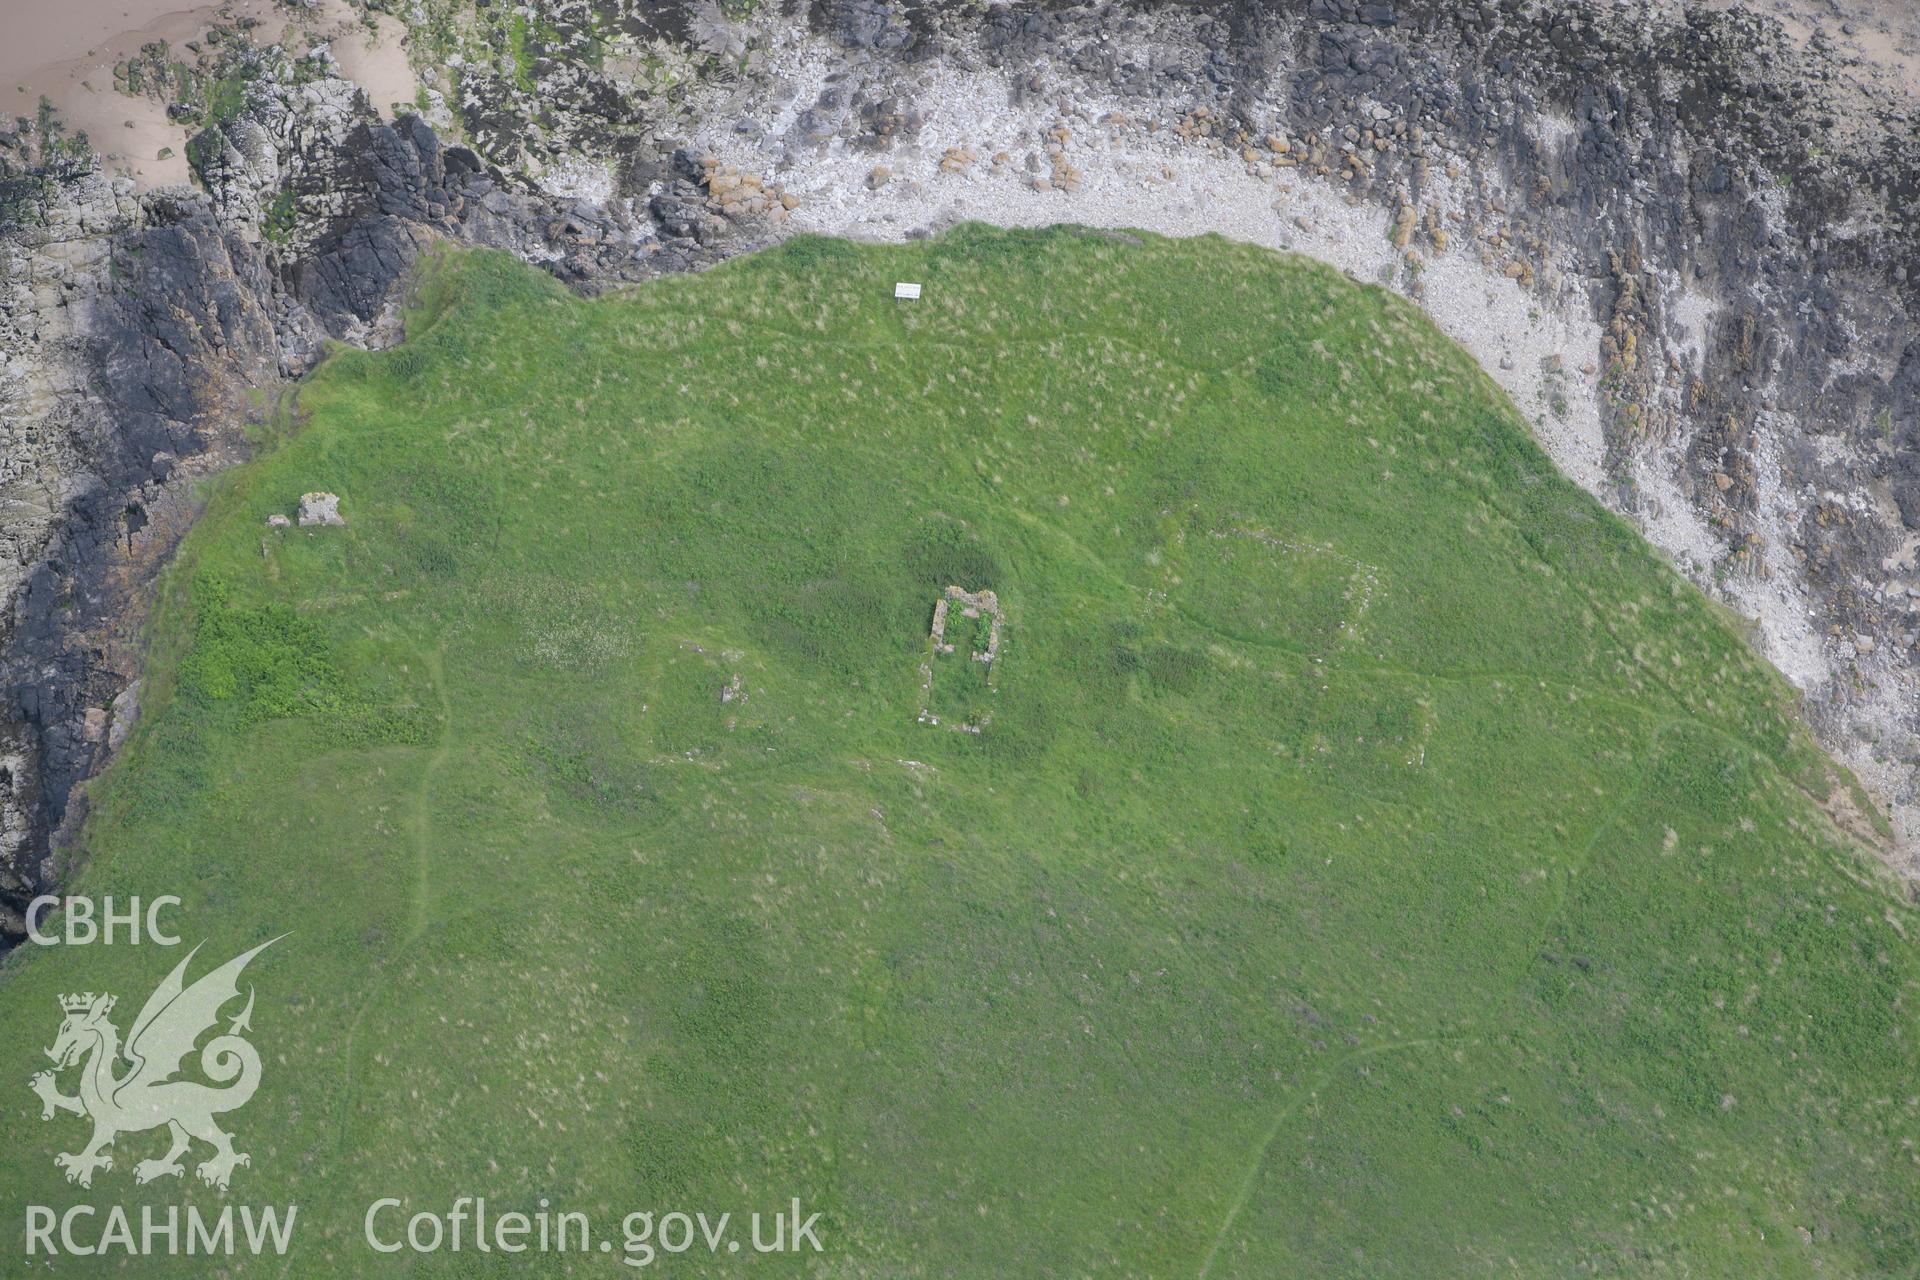 RCAHMW colour oblique photograph of Medieval Hermitage Site, Burry Holms. Taken by Toby Driver on 20/06/2008.